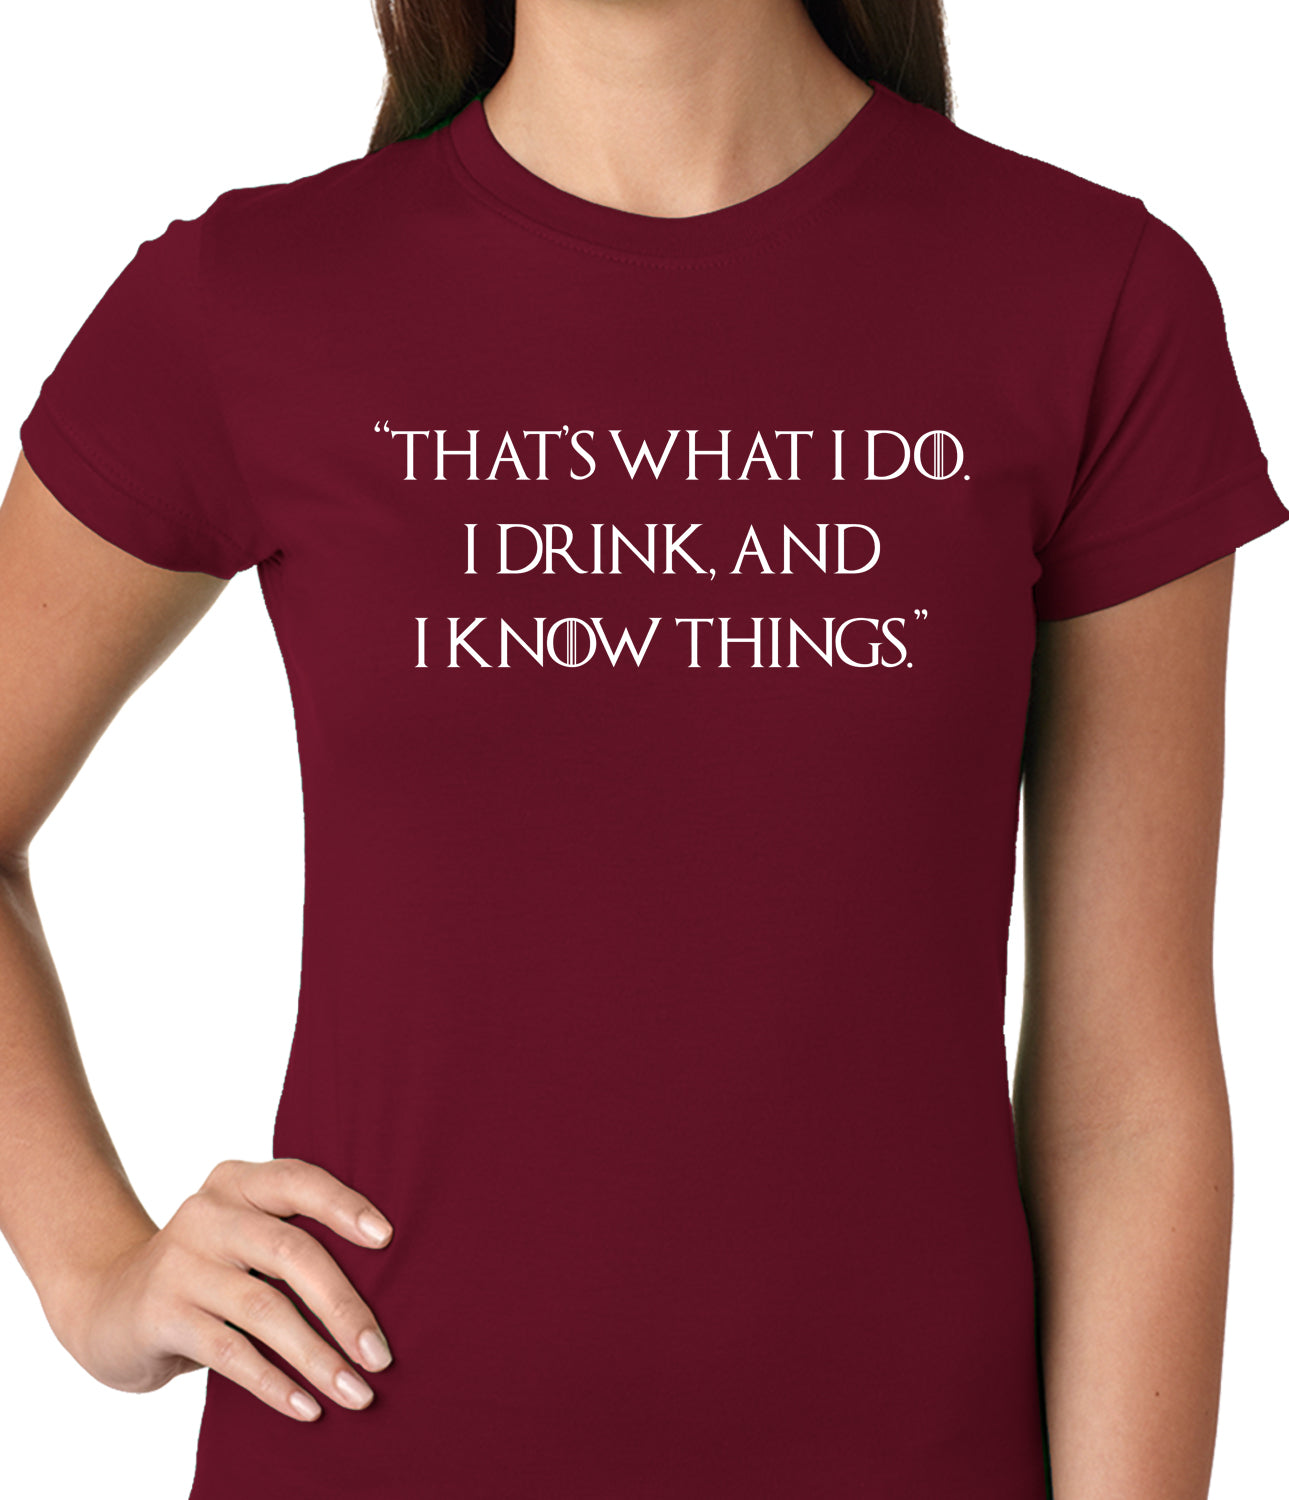 Thats What I Do. I Drink and I Know Things Ladies T-shirt